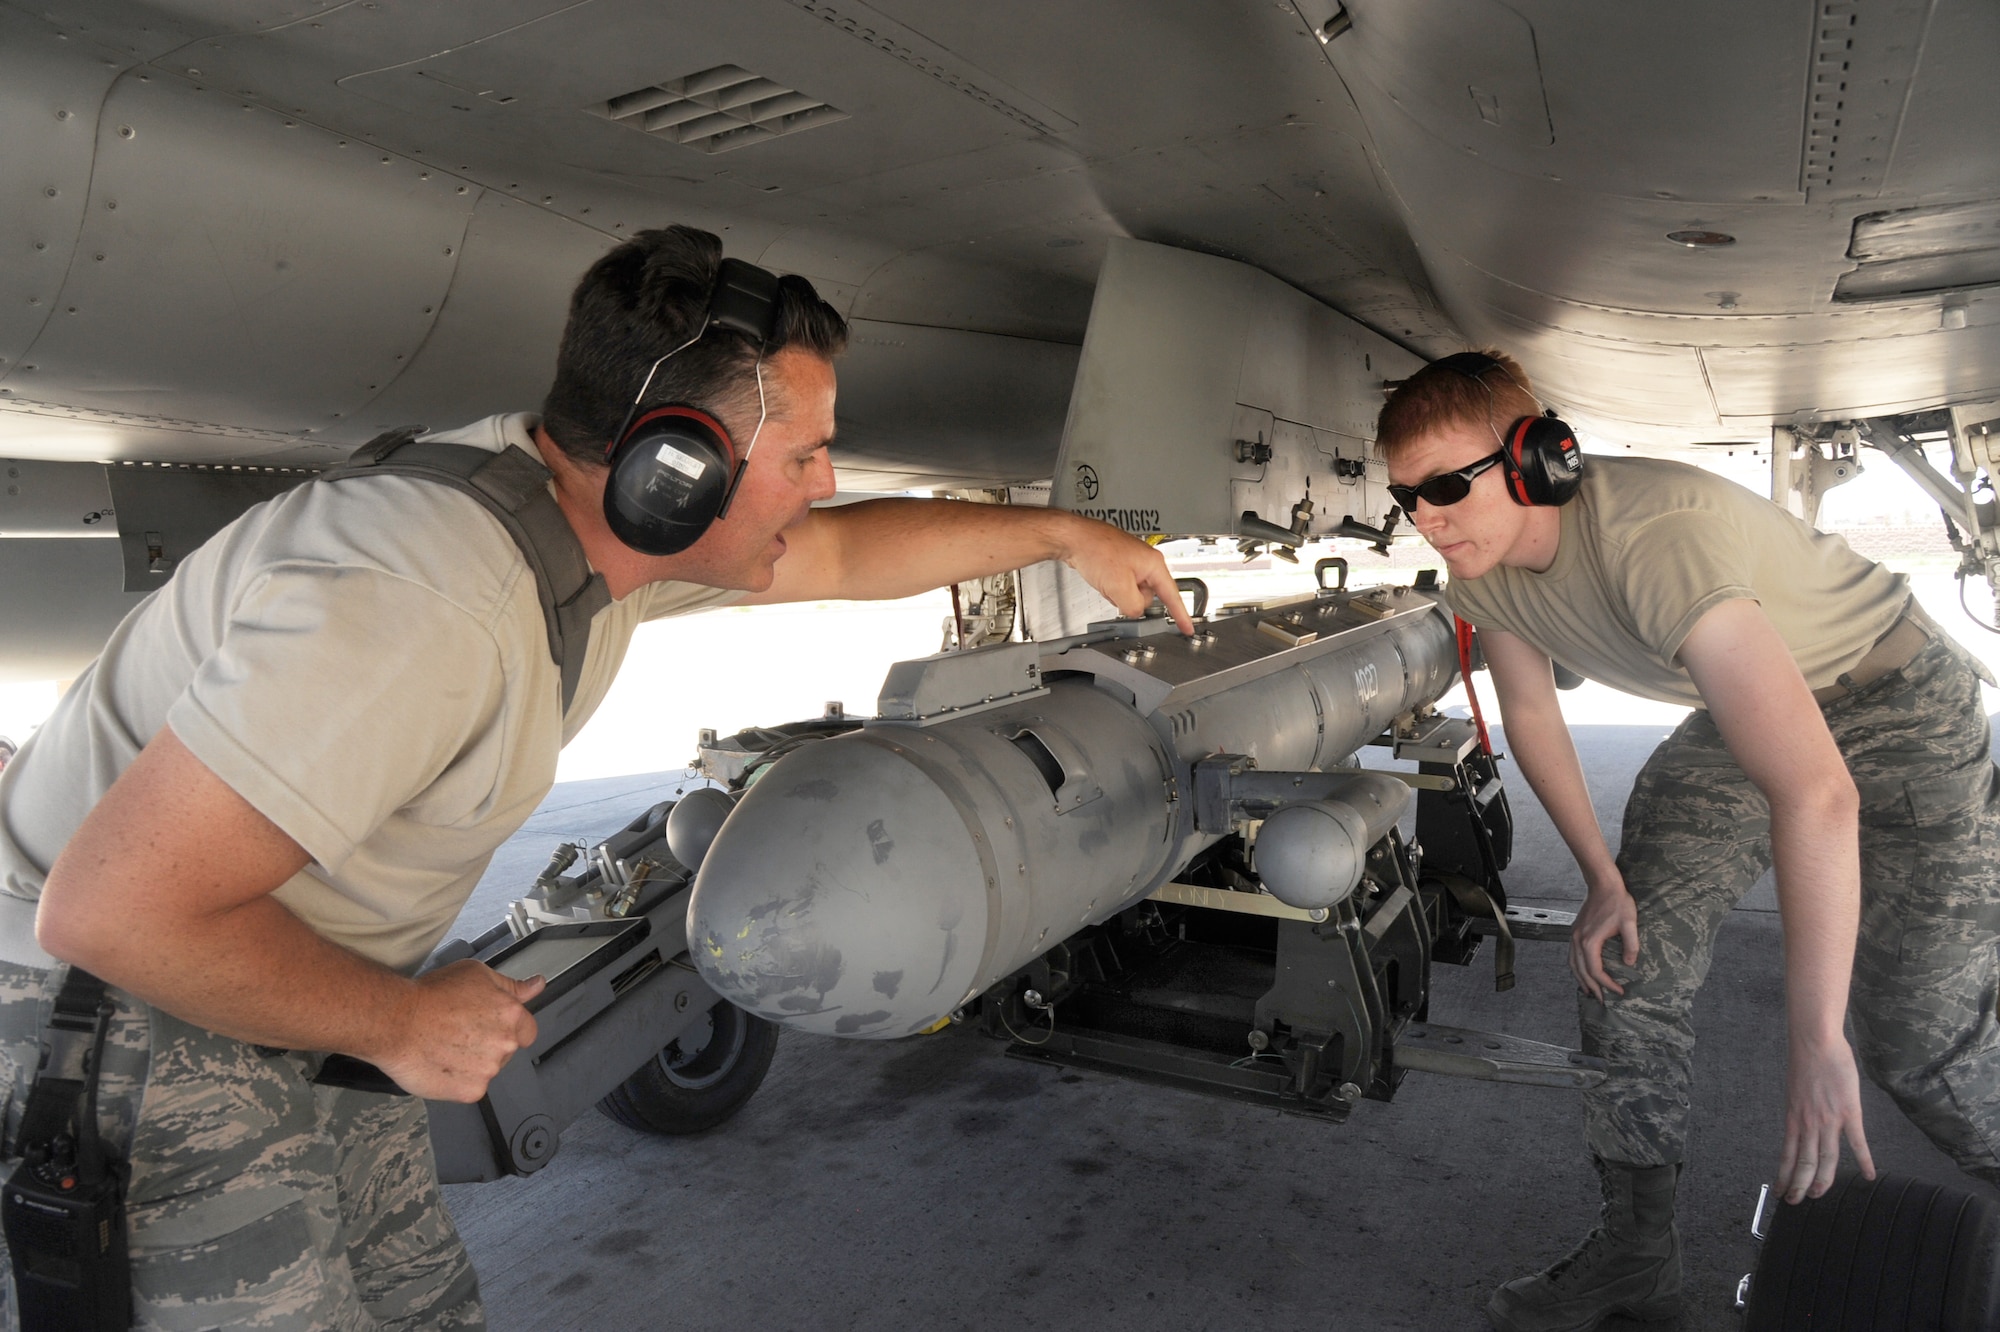 Oregon Air National Guard Avionics Technicians Master Sgt. Haina Searls (left) and Senior Airman Darian Forbes (right), assigned to the 142nd Fighter Wing Maintenance Group, work to install the AN/ALQ-188 pod to a F-15 Eagle, assigned to the 142nd Fighter Wing prior to an afternoon flight in support of the Weapons Instructor Course at Nellis Air Force Base, Nev., June 14, 2017. (U.S. Air National Guard photo by Tech. Sgt. John Hughel, 142nd Fighter Wing Public Affairs)